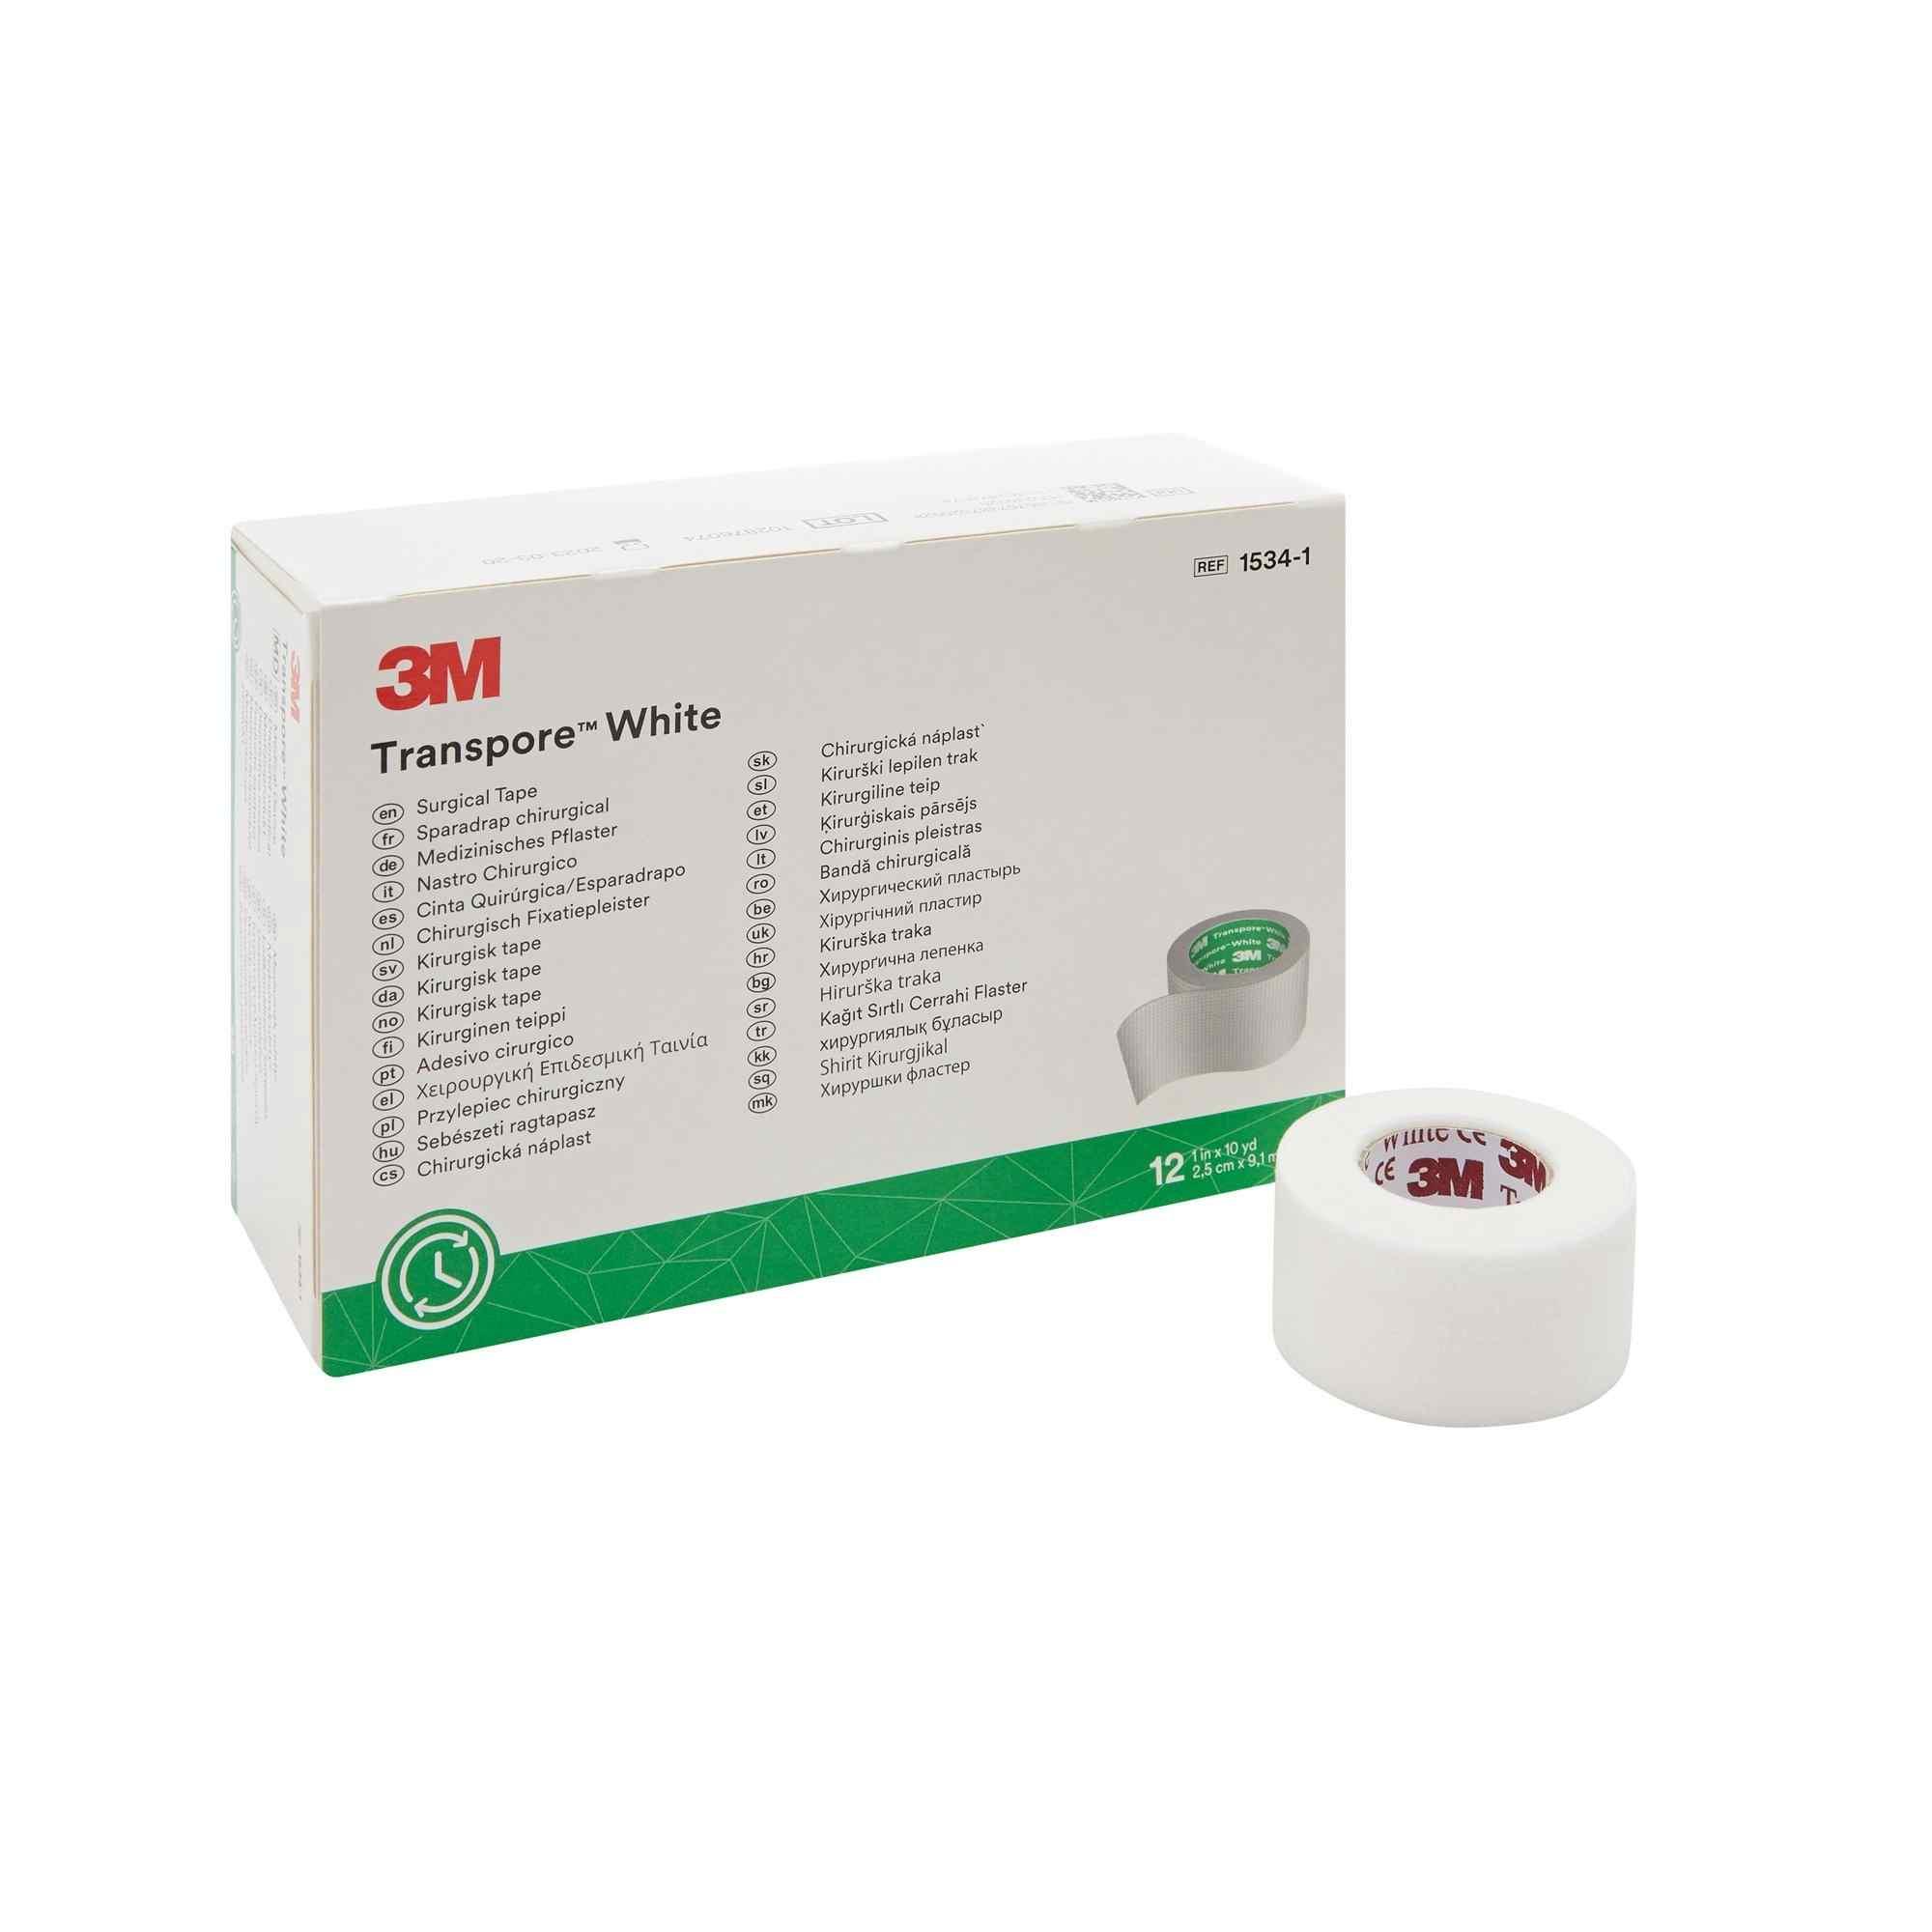 3M Transpore White Surgical Tape, 1" X 10 yd, 1534-1, Box of 12